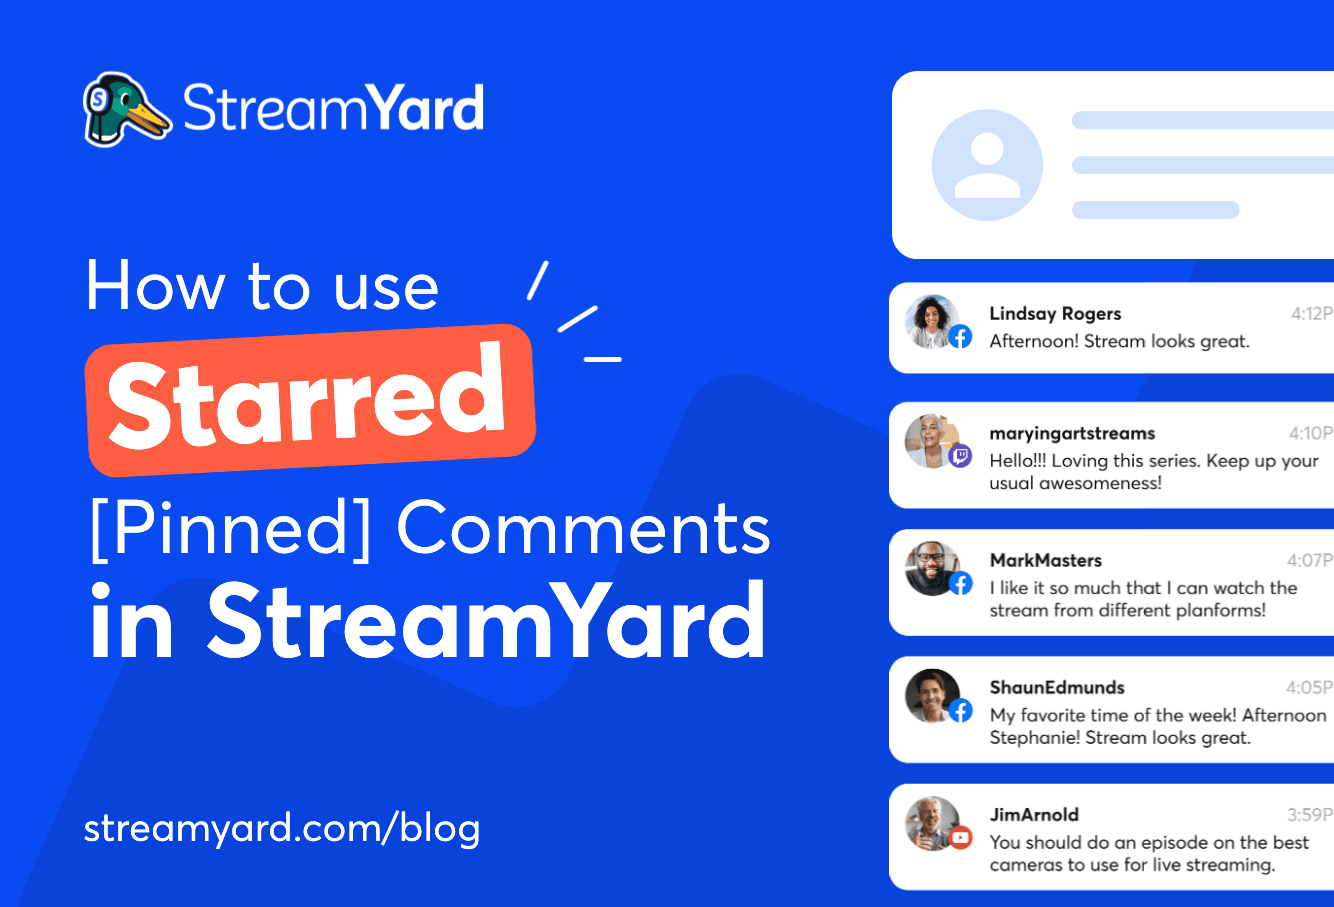 Learn how to use starred comments in StreamYard to pin important questions from your audience when live streaming.